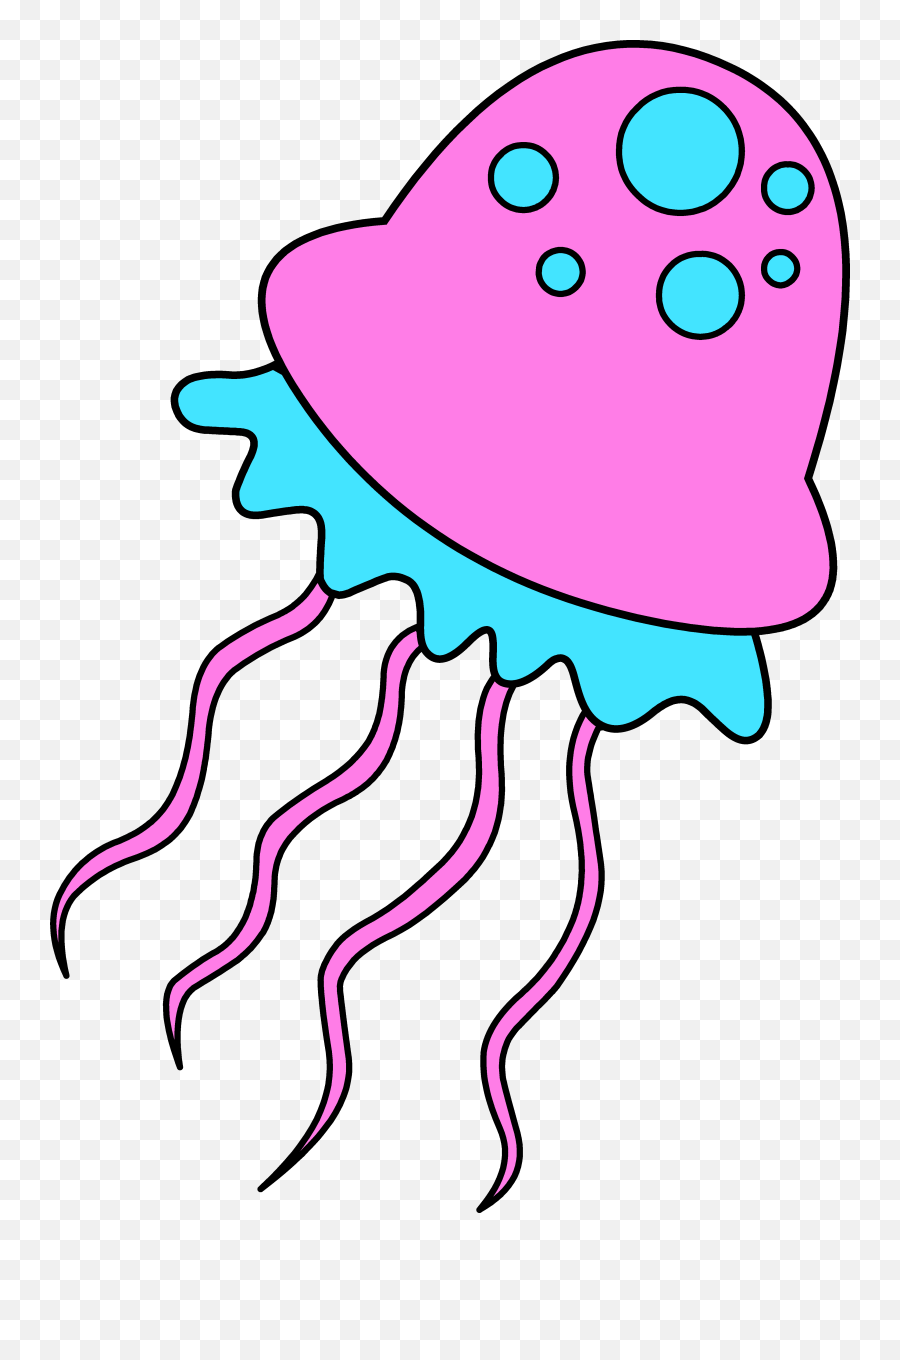 Spongebob Jellyfish Png Clipart - Clipart Of Jelly Fish,Transparent Jellyfish